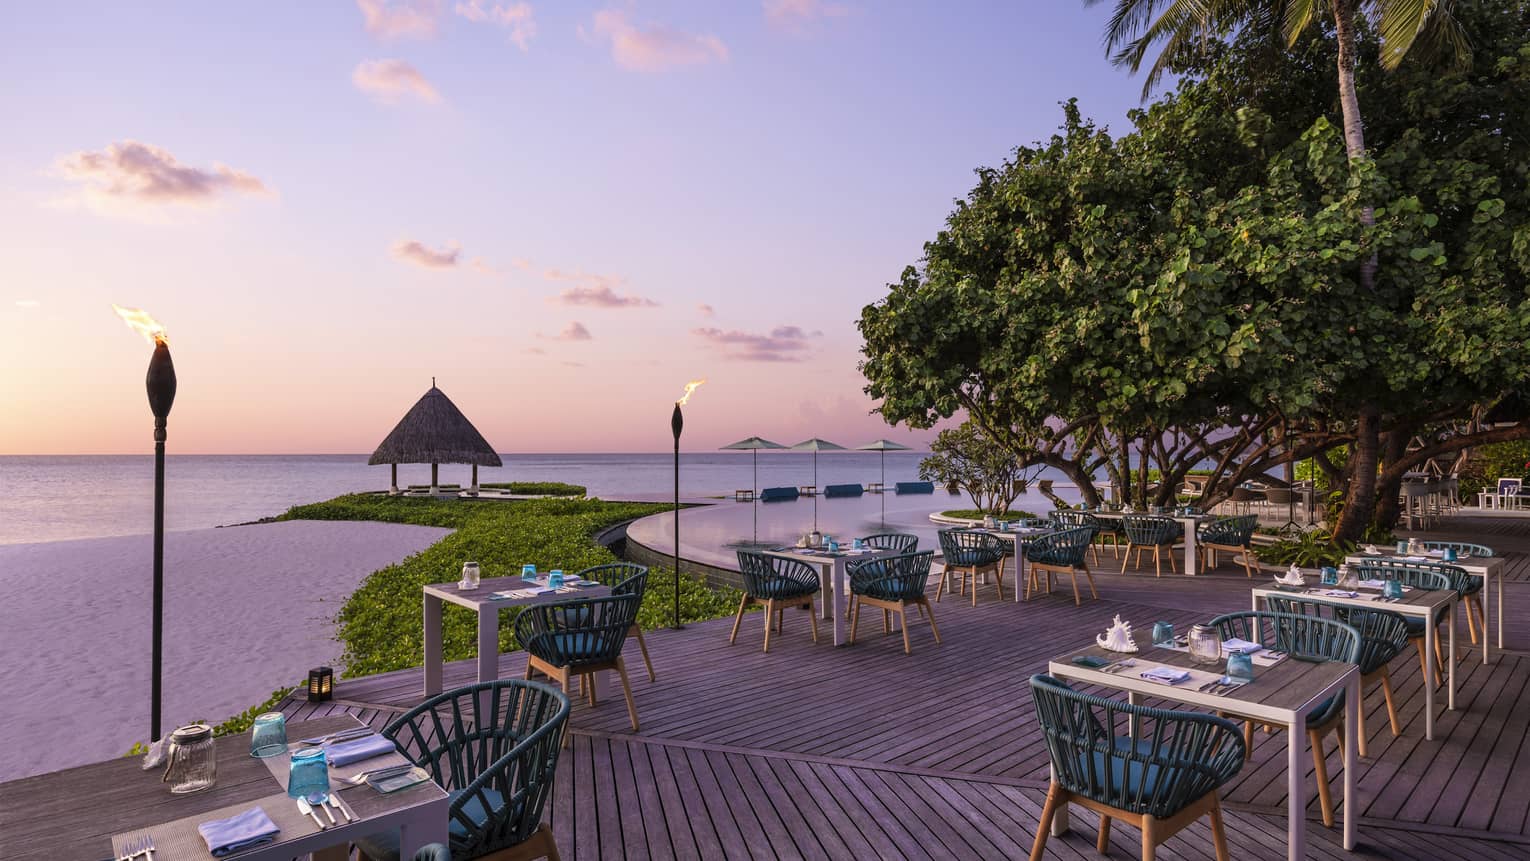 Tiki torches line the oceanside Reef Club terrace that's ready for guests with tables set with plates, silverware, blue napkins, all overlooking the ocean